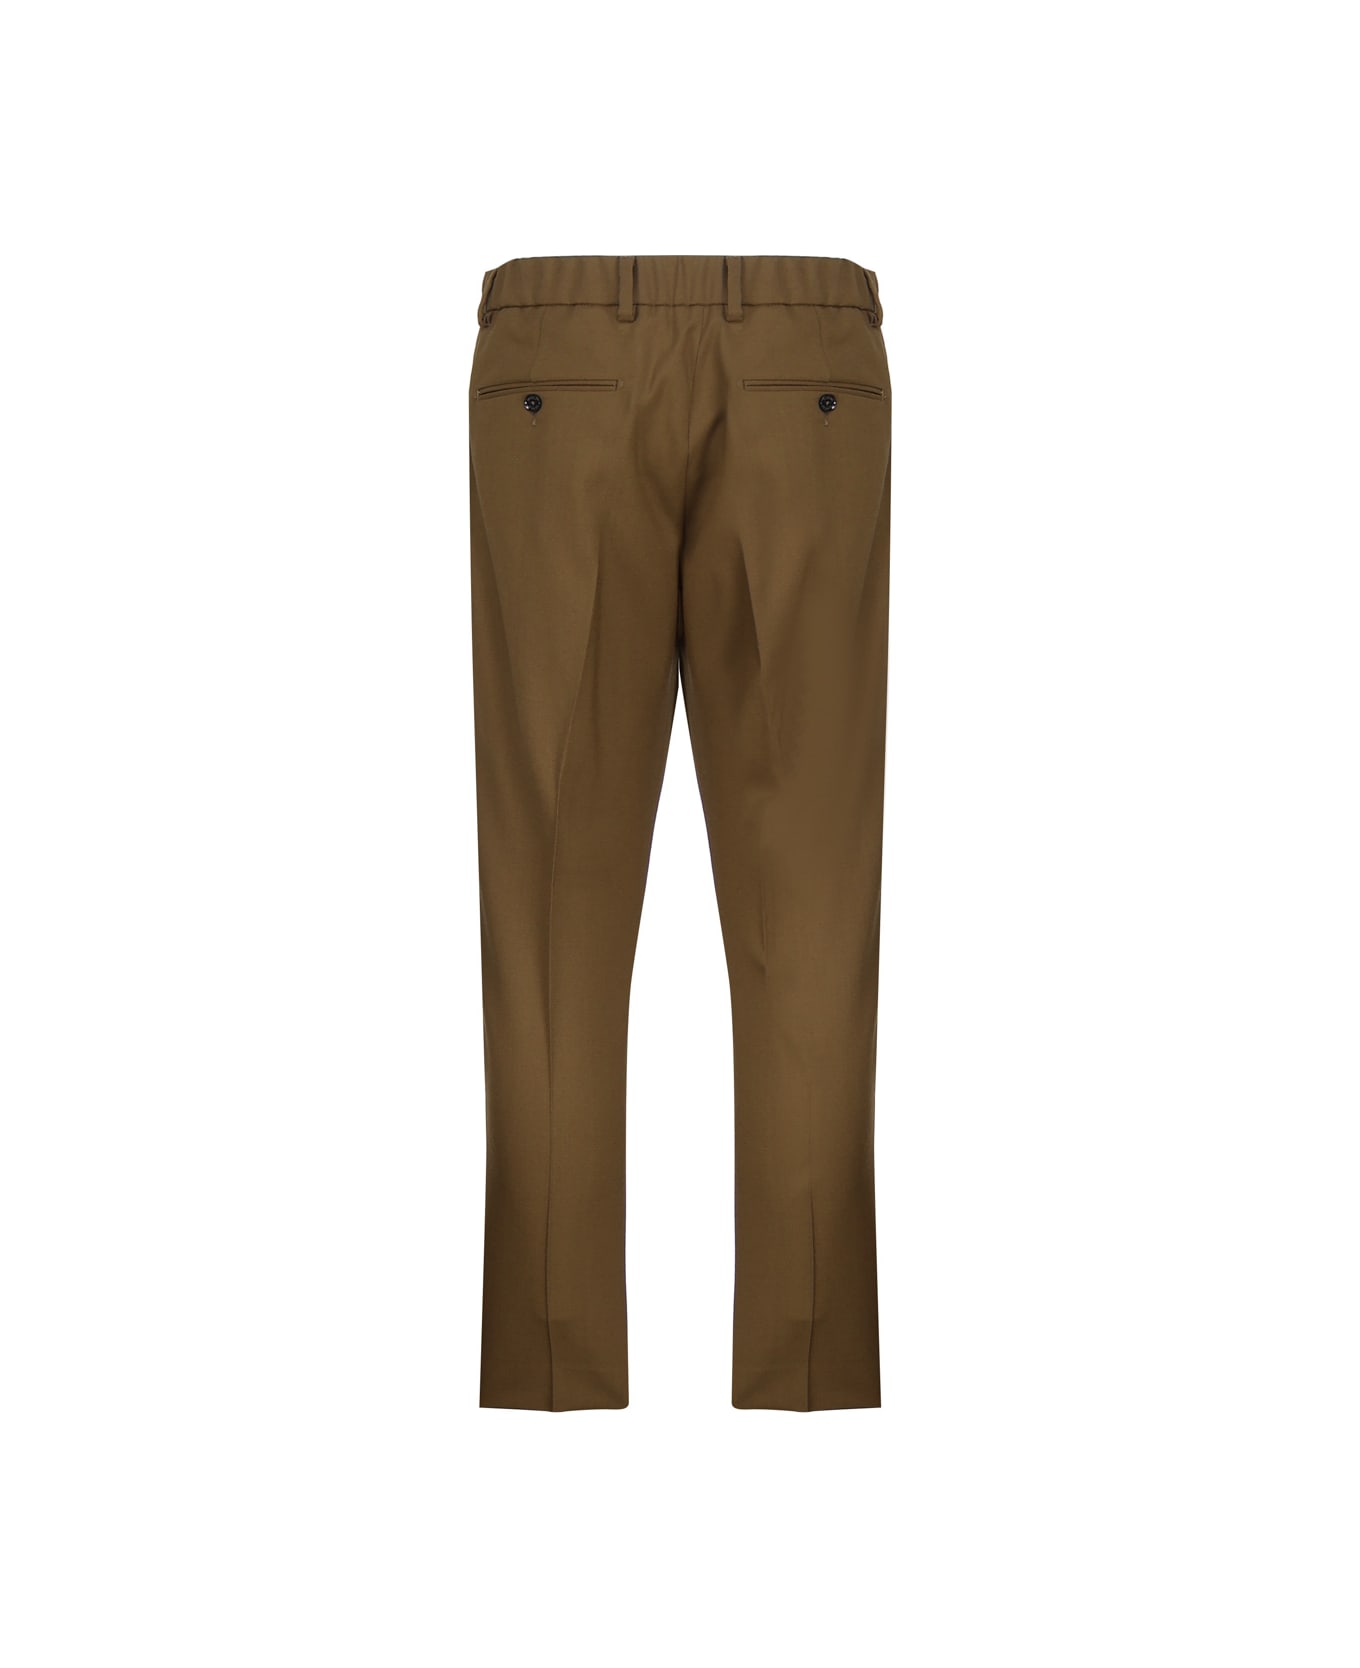 Be Able Riccardo Trousers - Tobacco